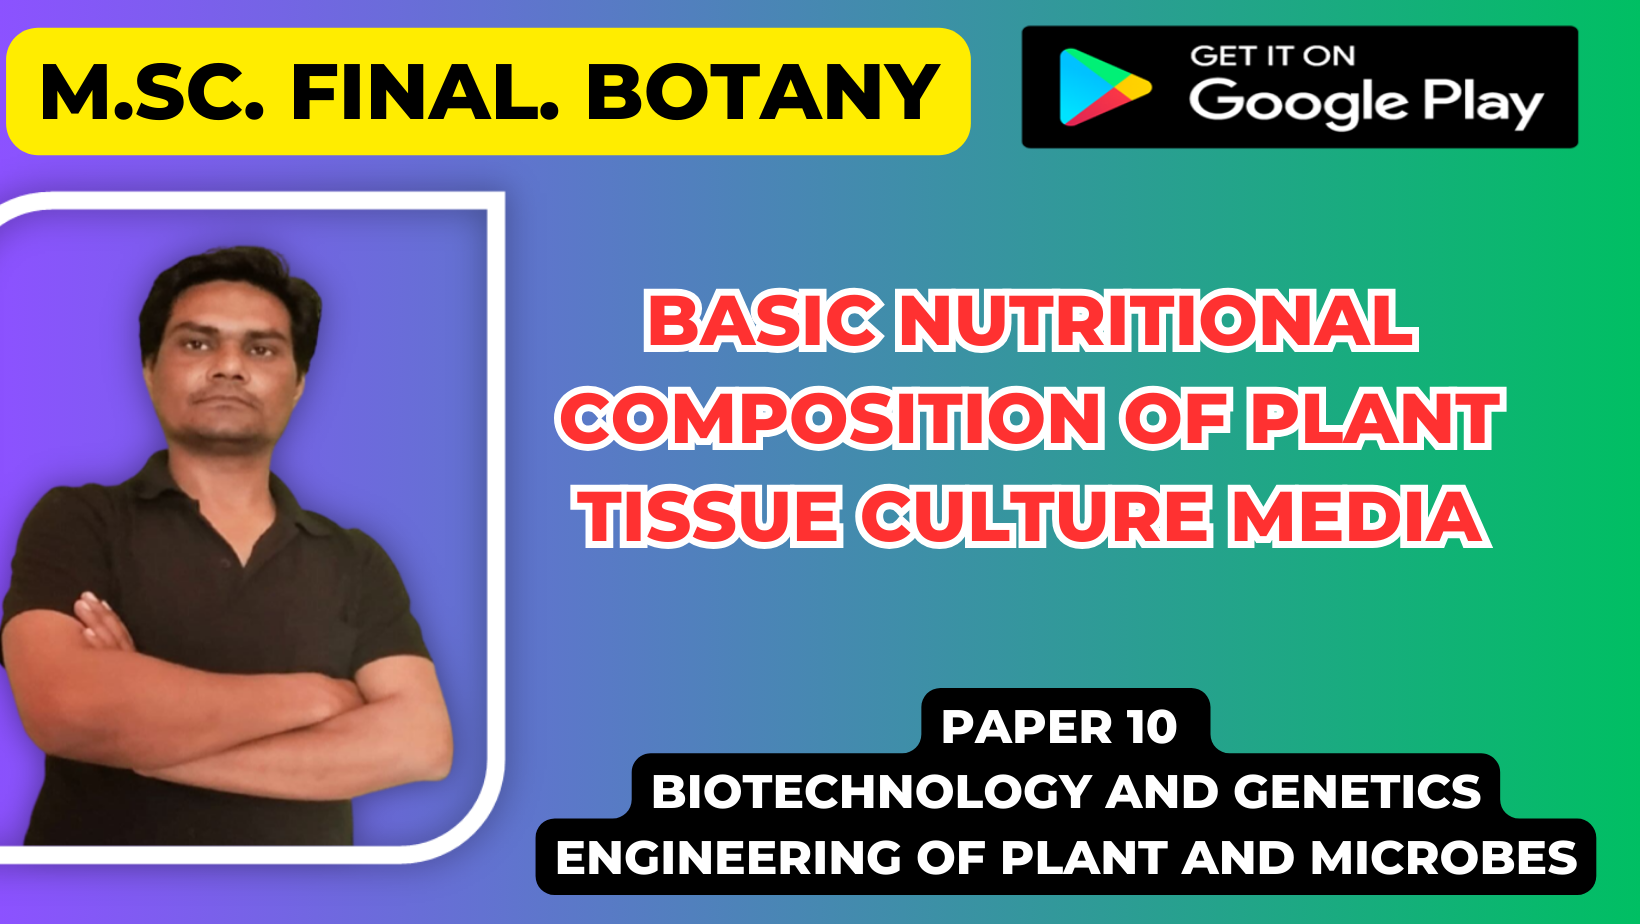 You are currently viewing Basic nutritional composition of plant tissue culture media